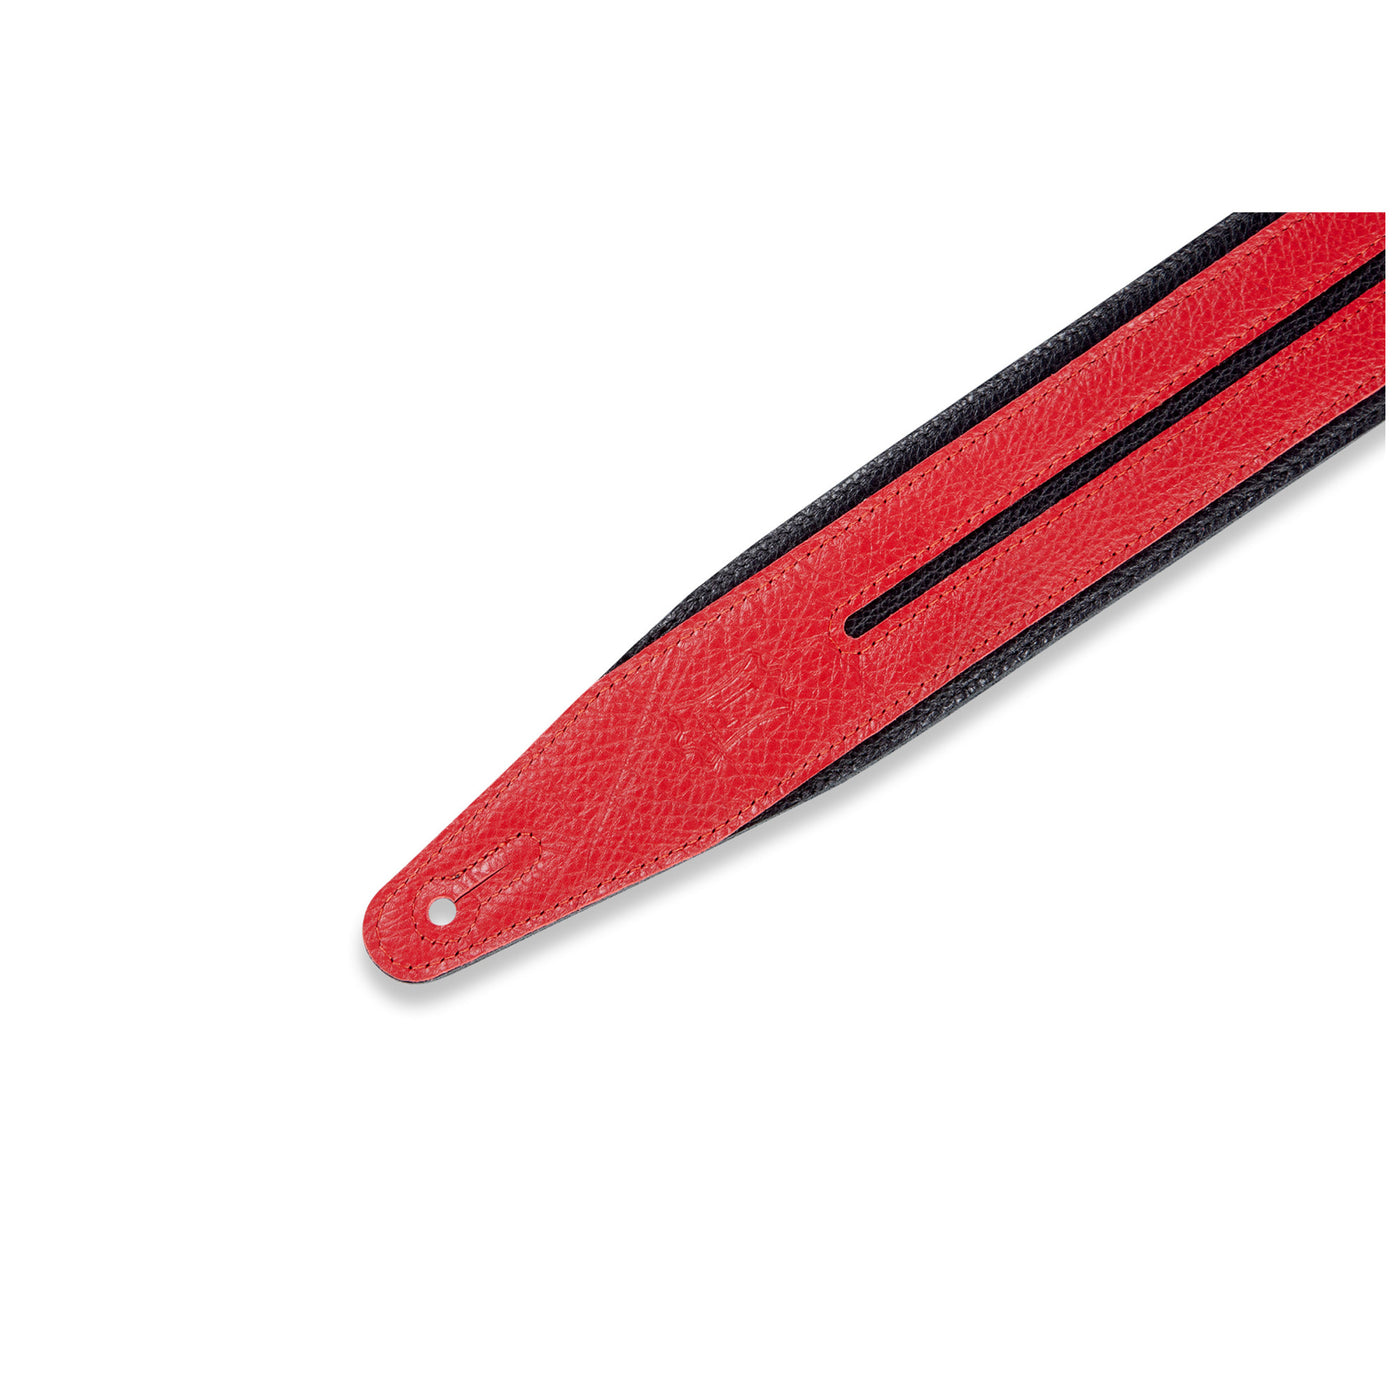 Levy's 2.5" Double Racing Stripe Strap in Red and Black